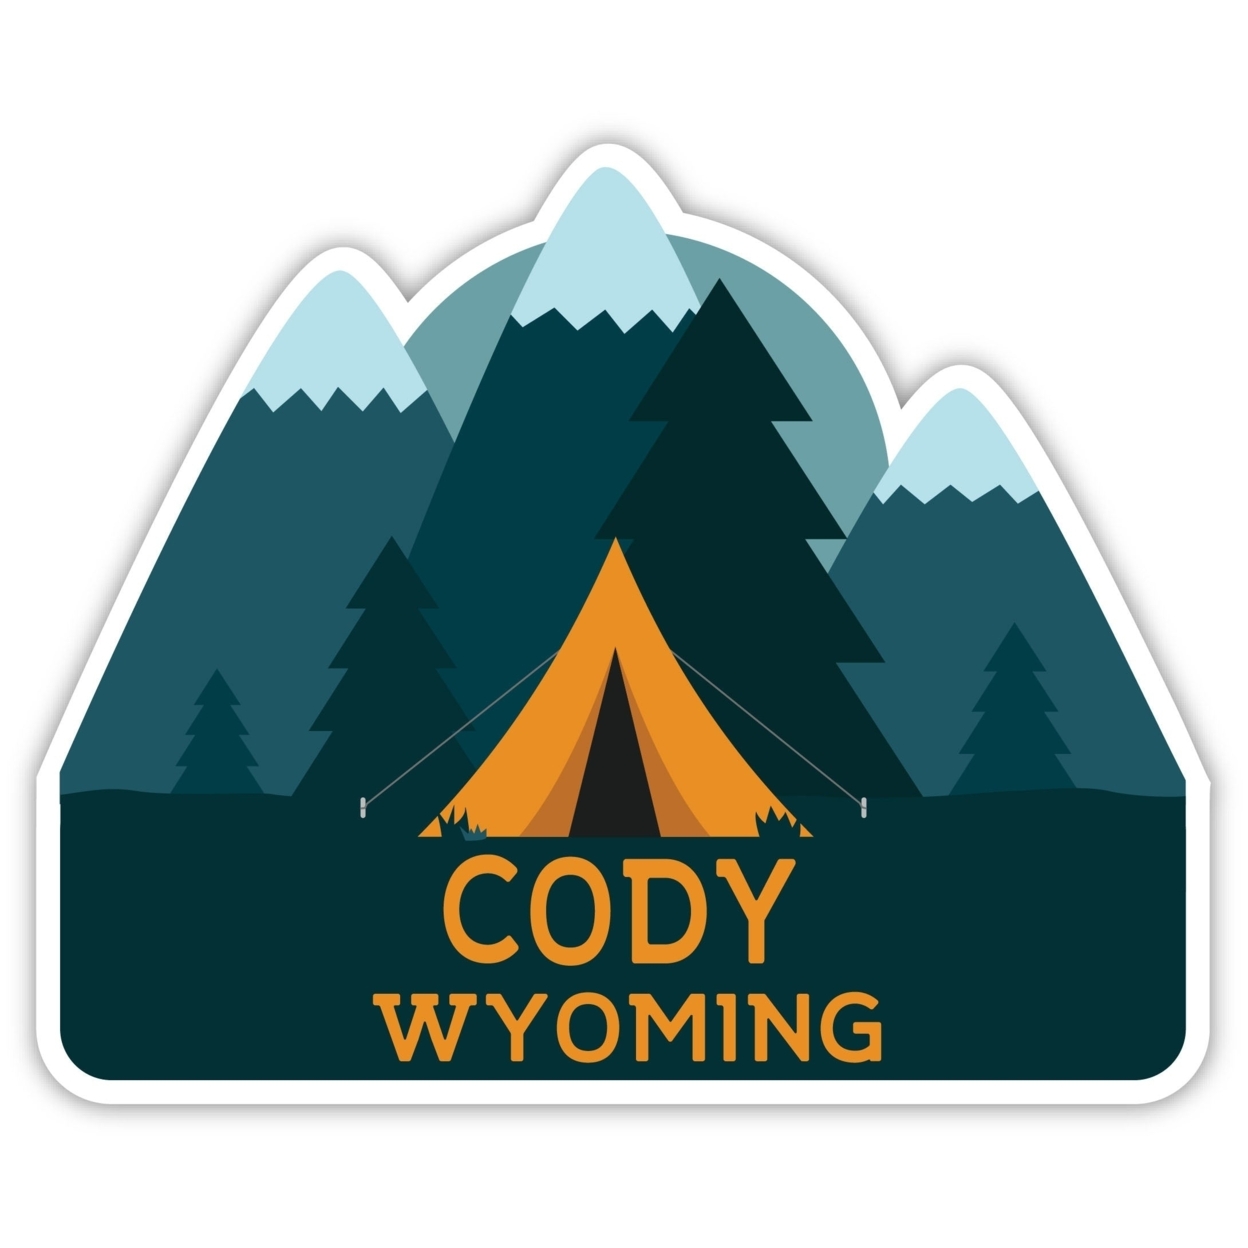 Cody Wyoming Souvenir Decorative Stickers (Choose Theme And Size) - Single Unit, 4-Inch, Adventures Awaits